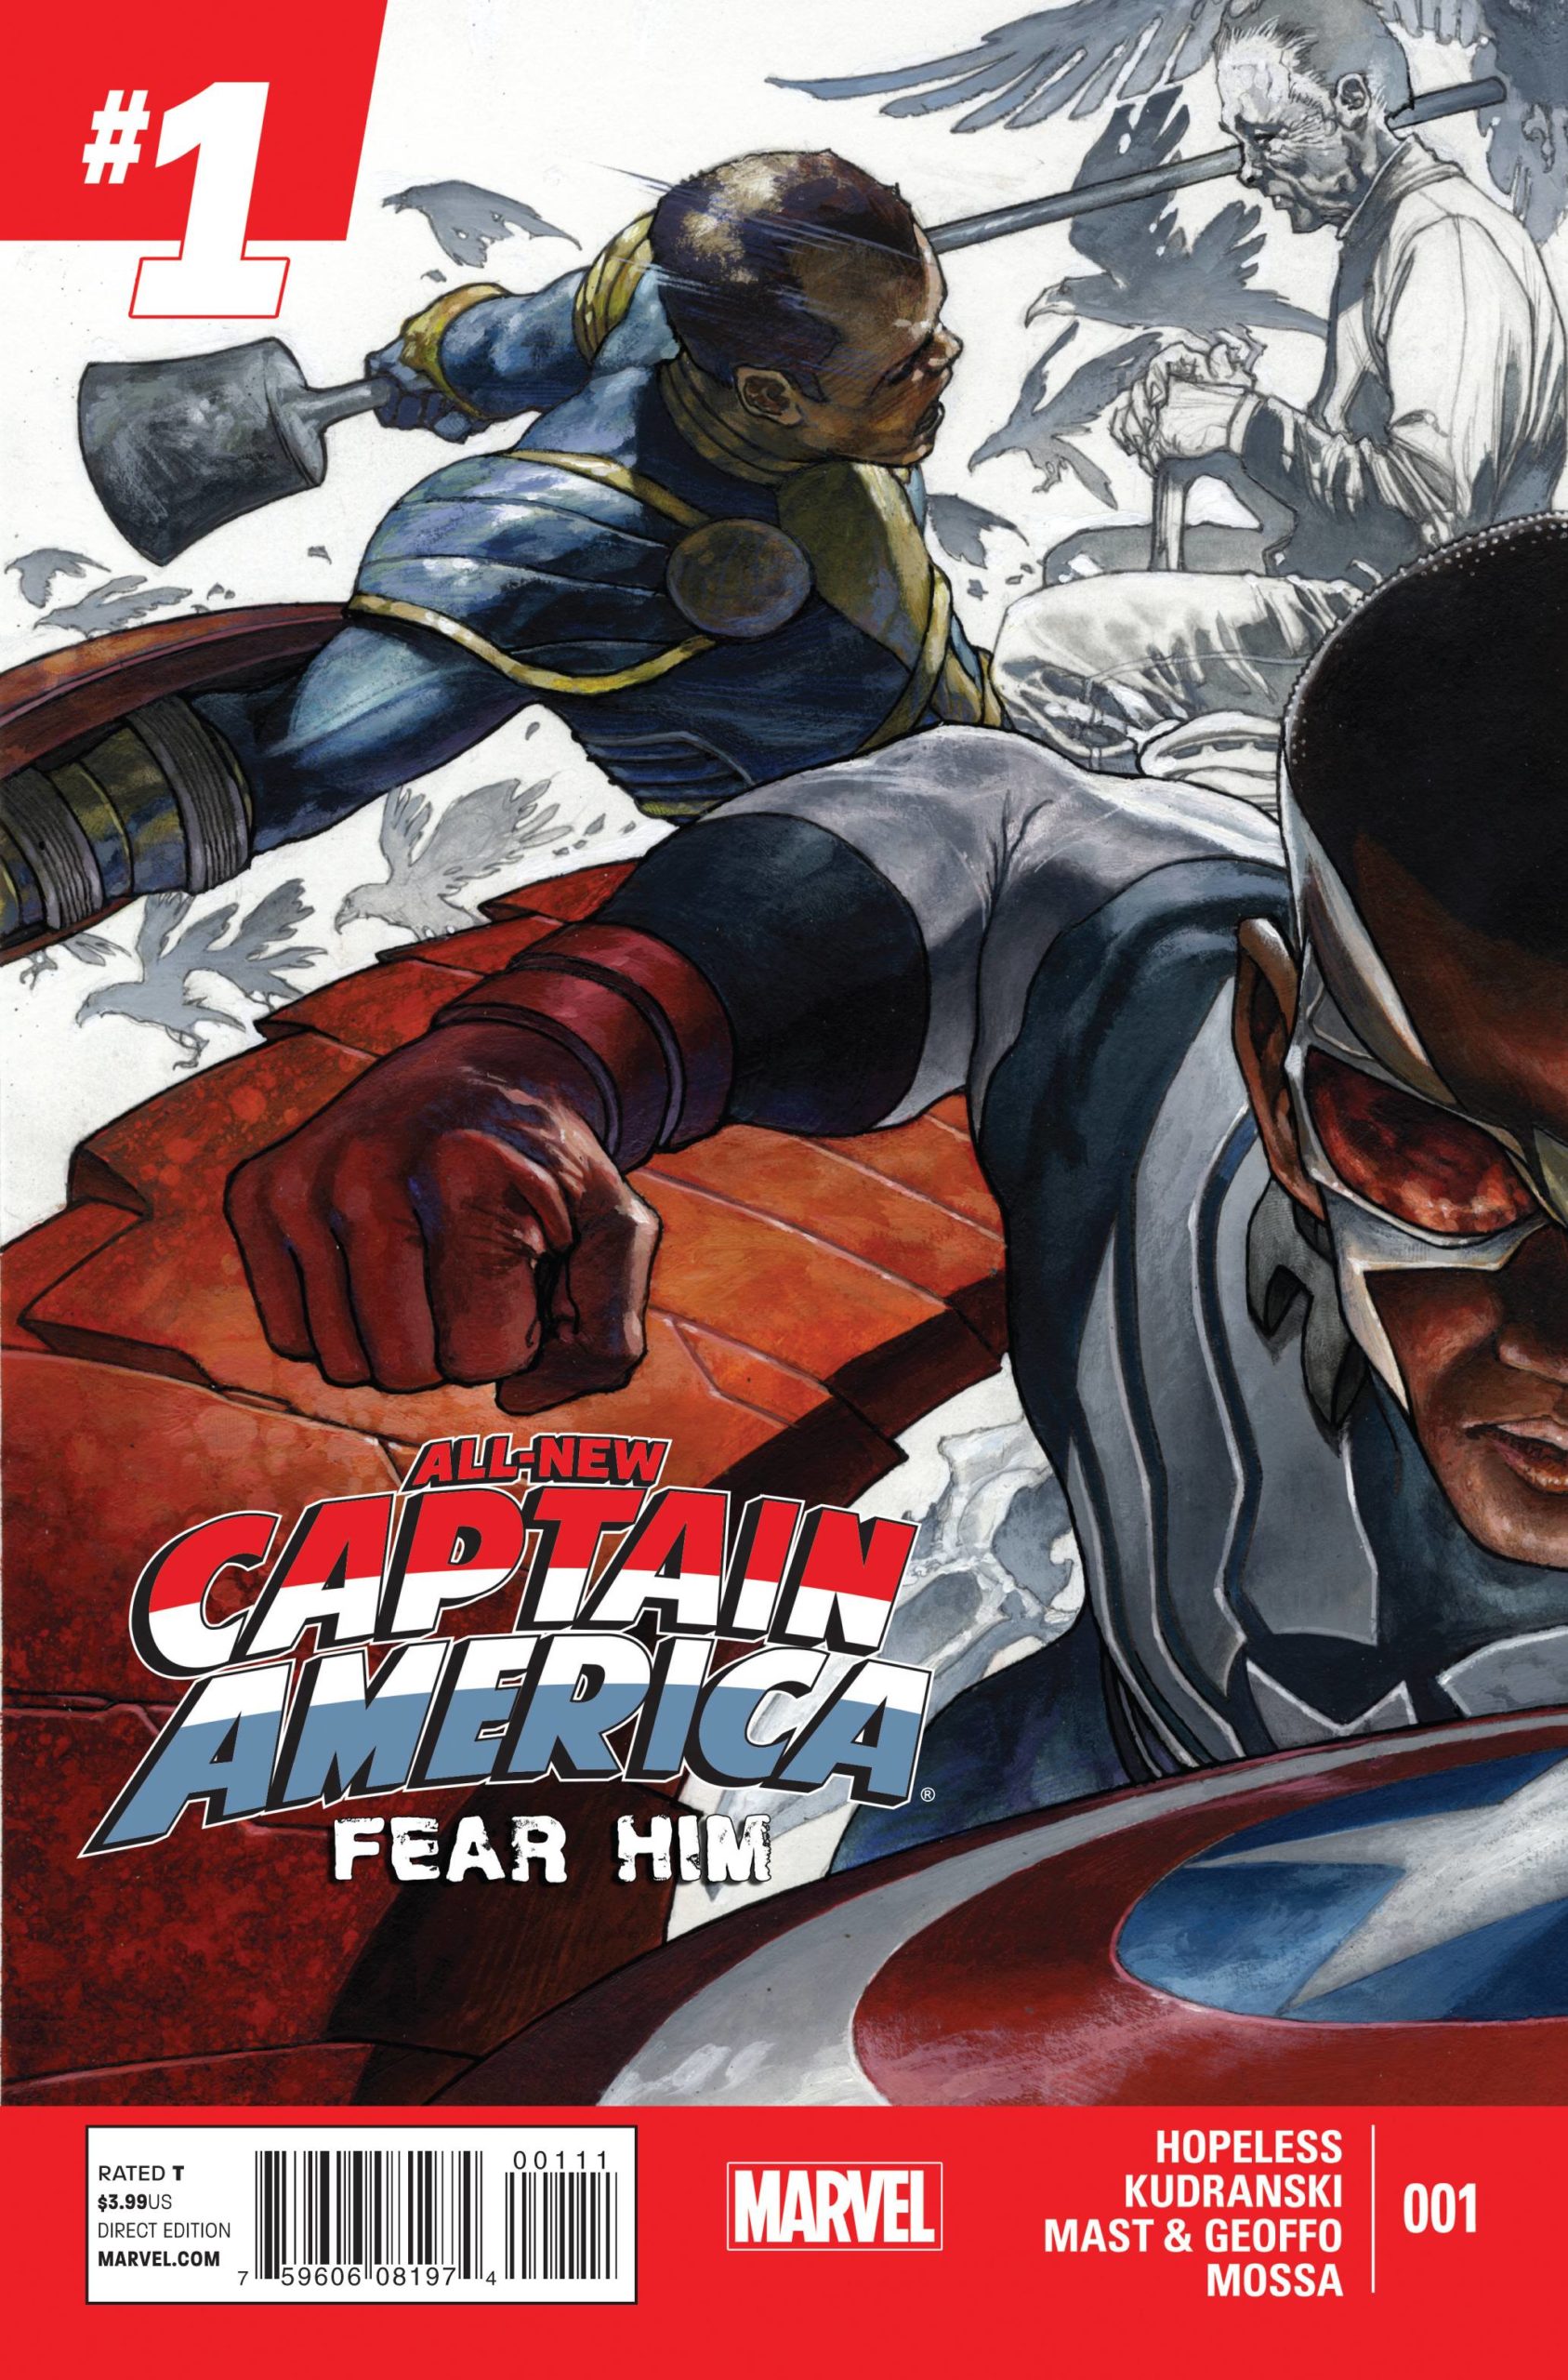 ALL NEW CAPTAIN AMERICA: FEAR HIM (MS 4)